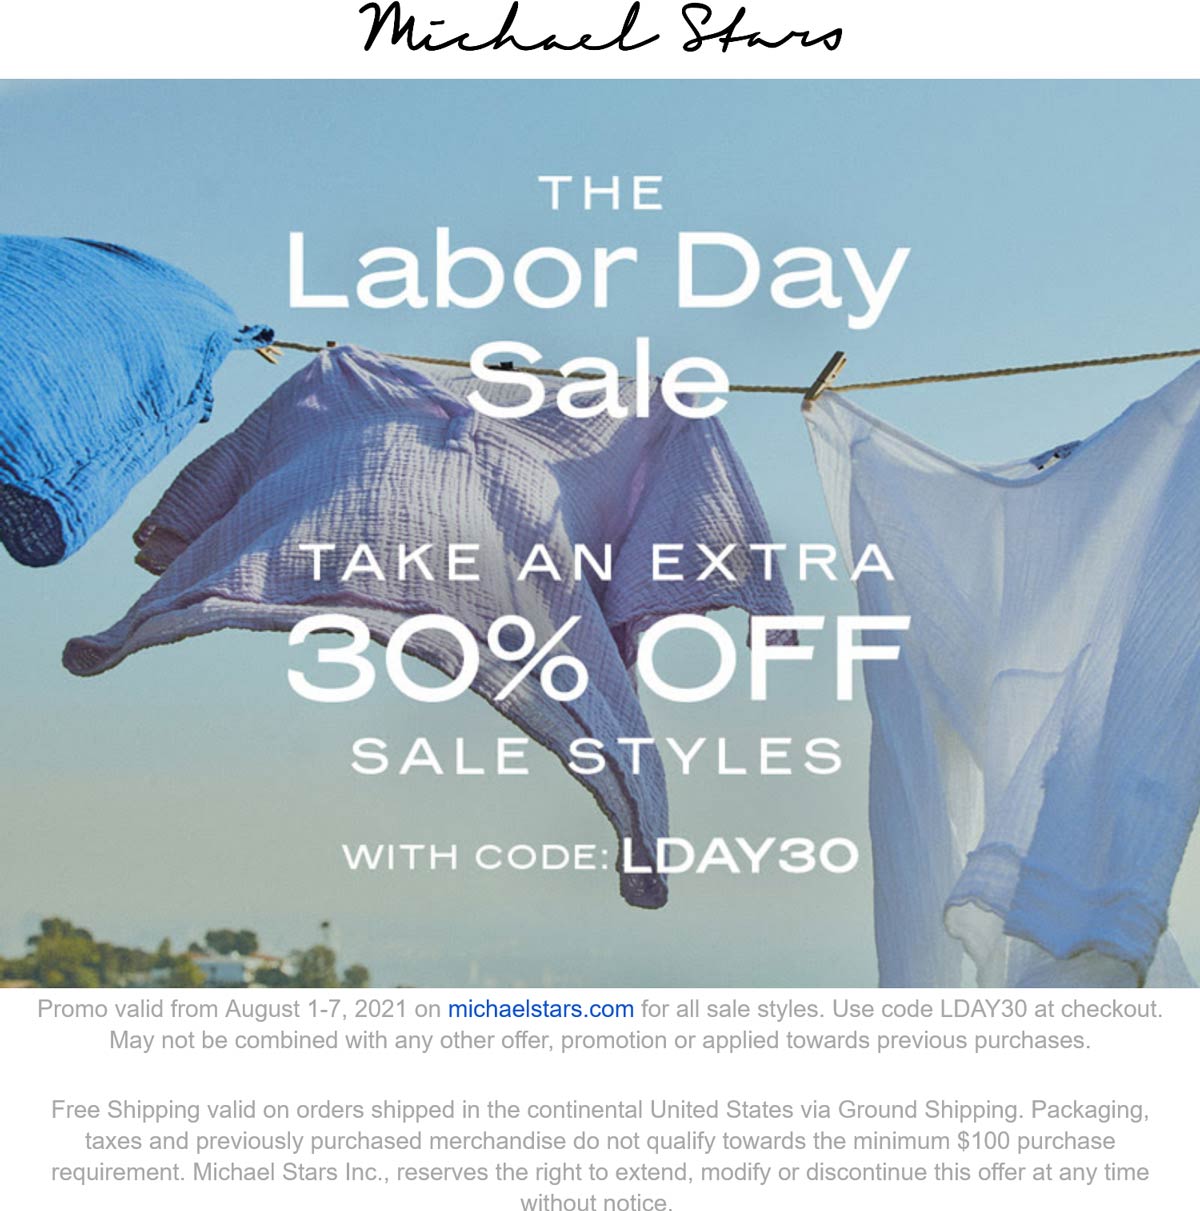 Michael Stars stores Coupon  Extra 30% off sale styles at Michael Stars via promo code LDAY30 #michaelstars 